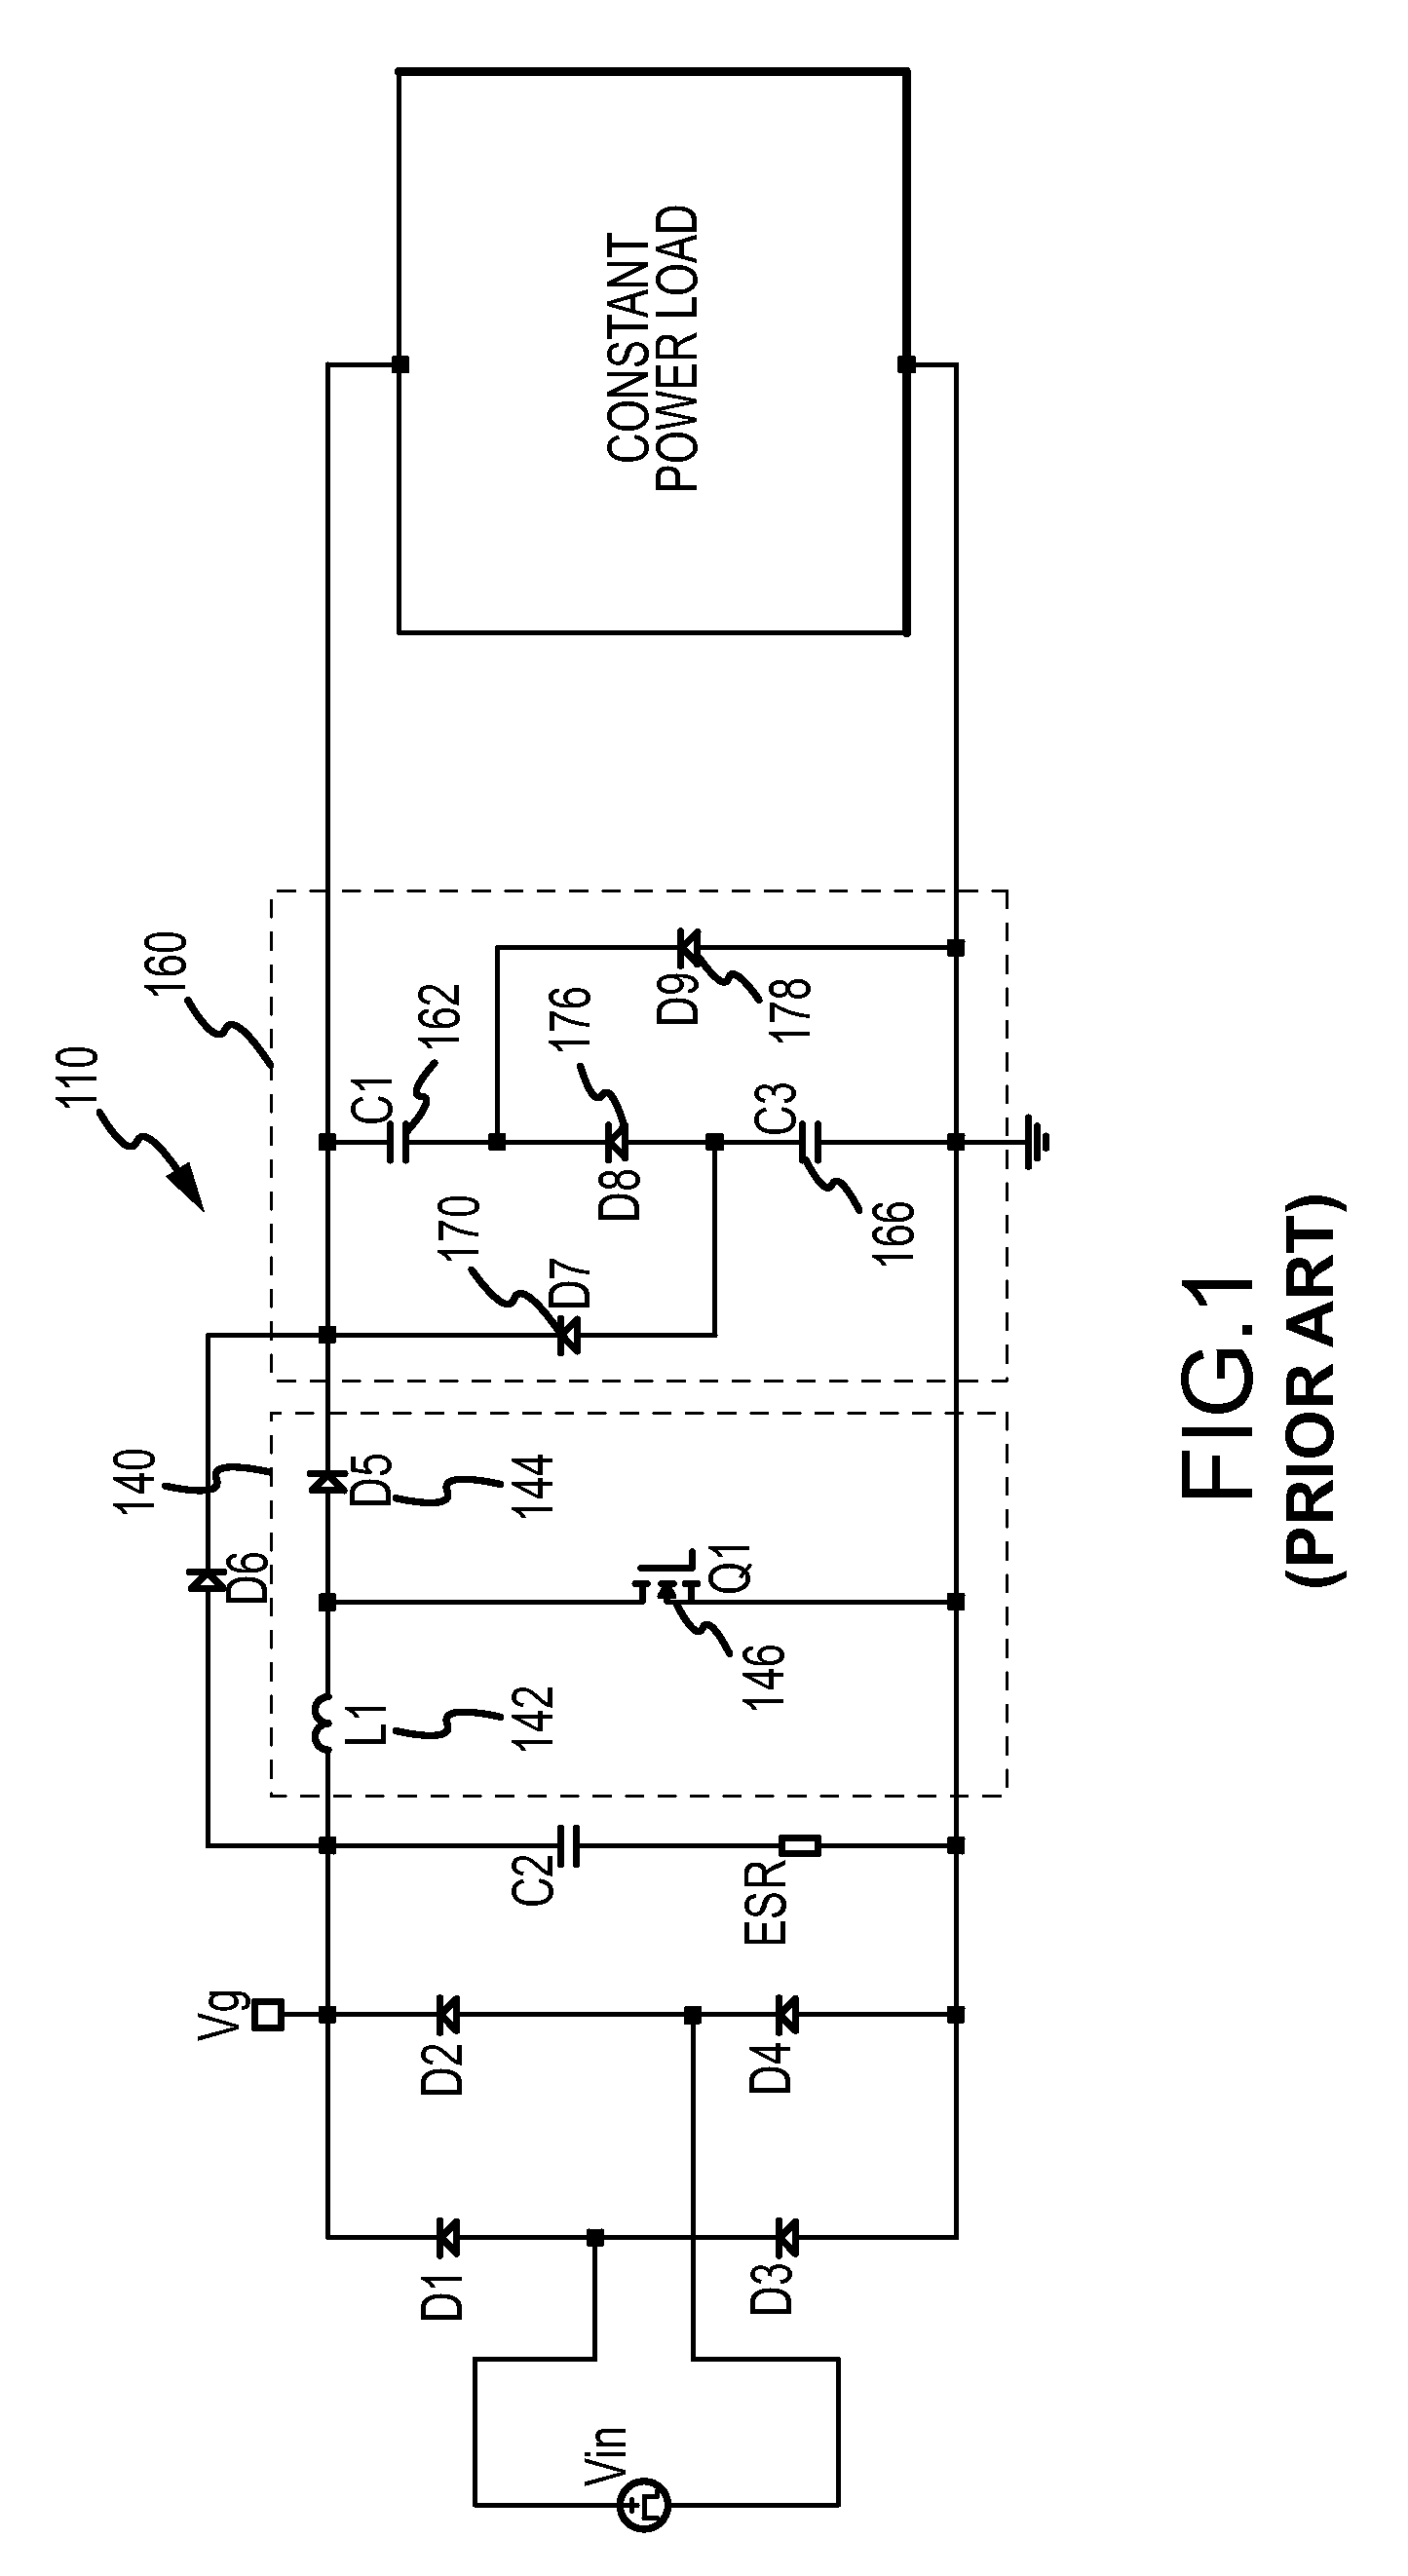 AC to DC converter with power factor correction